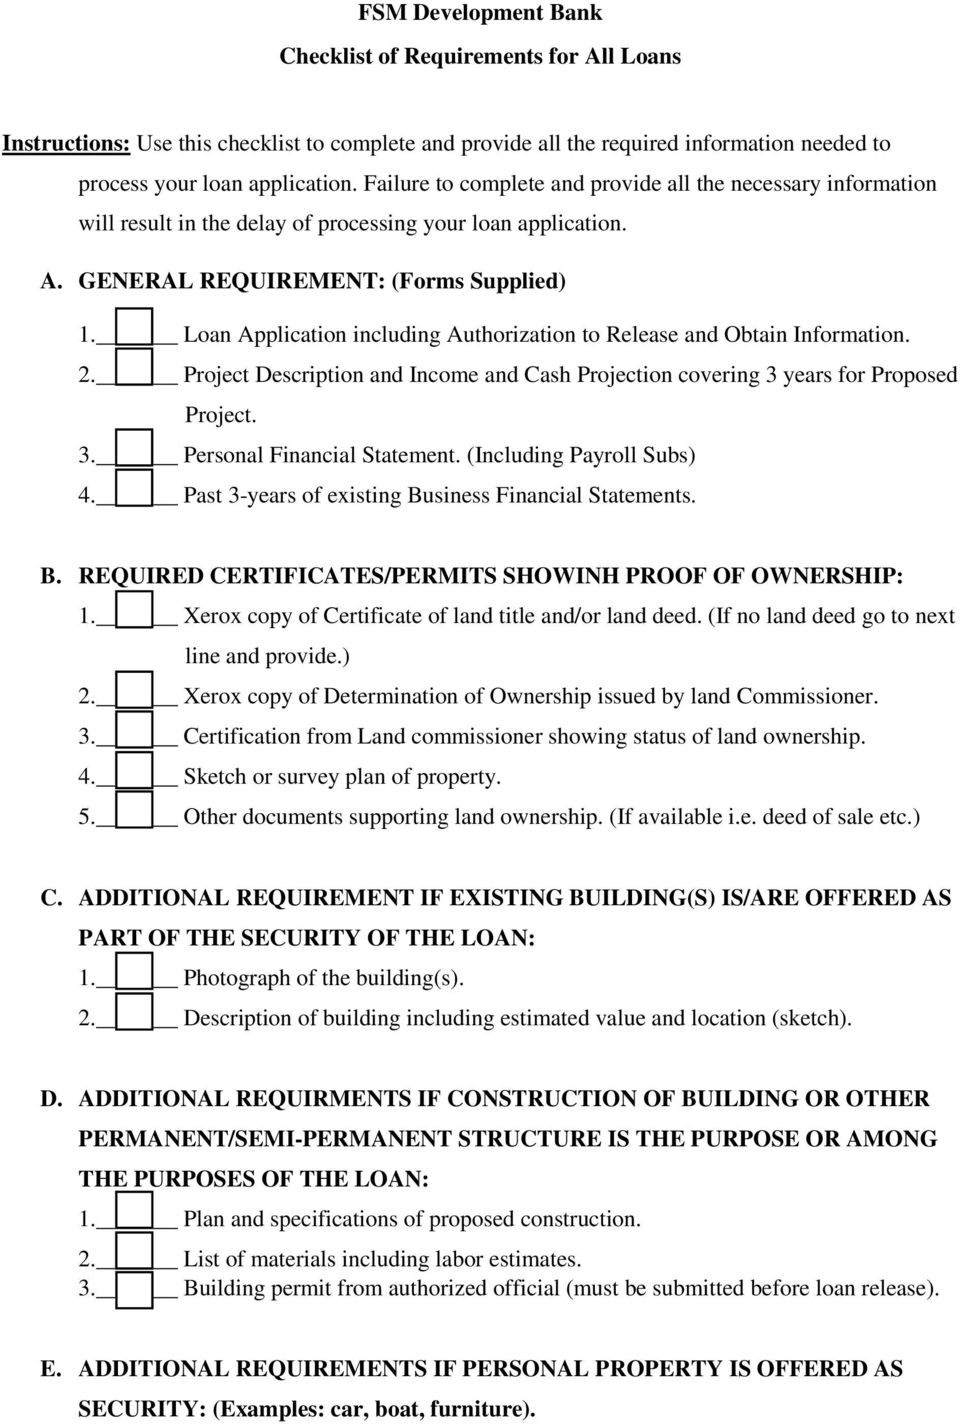 Loan Application including Authorization to Release and Obtain Information. 2. Project Description and Income and Cash Projection covering 3 years for Proposed Project. 3. Personal Financial Statement.